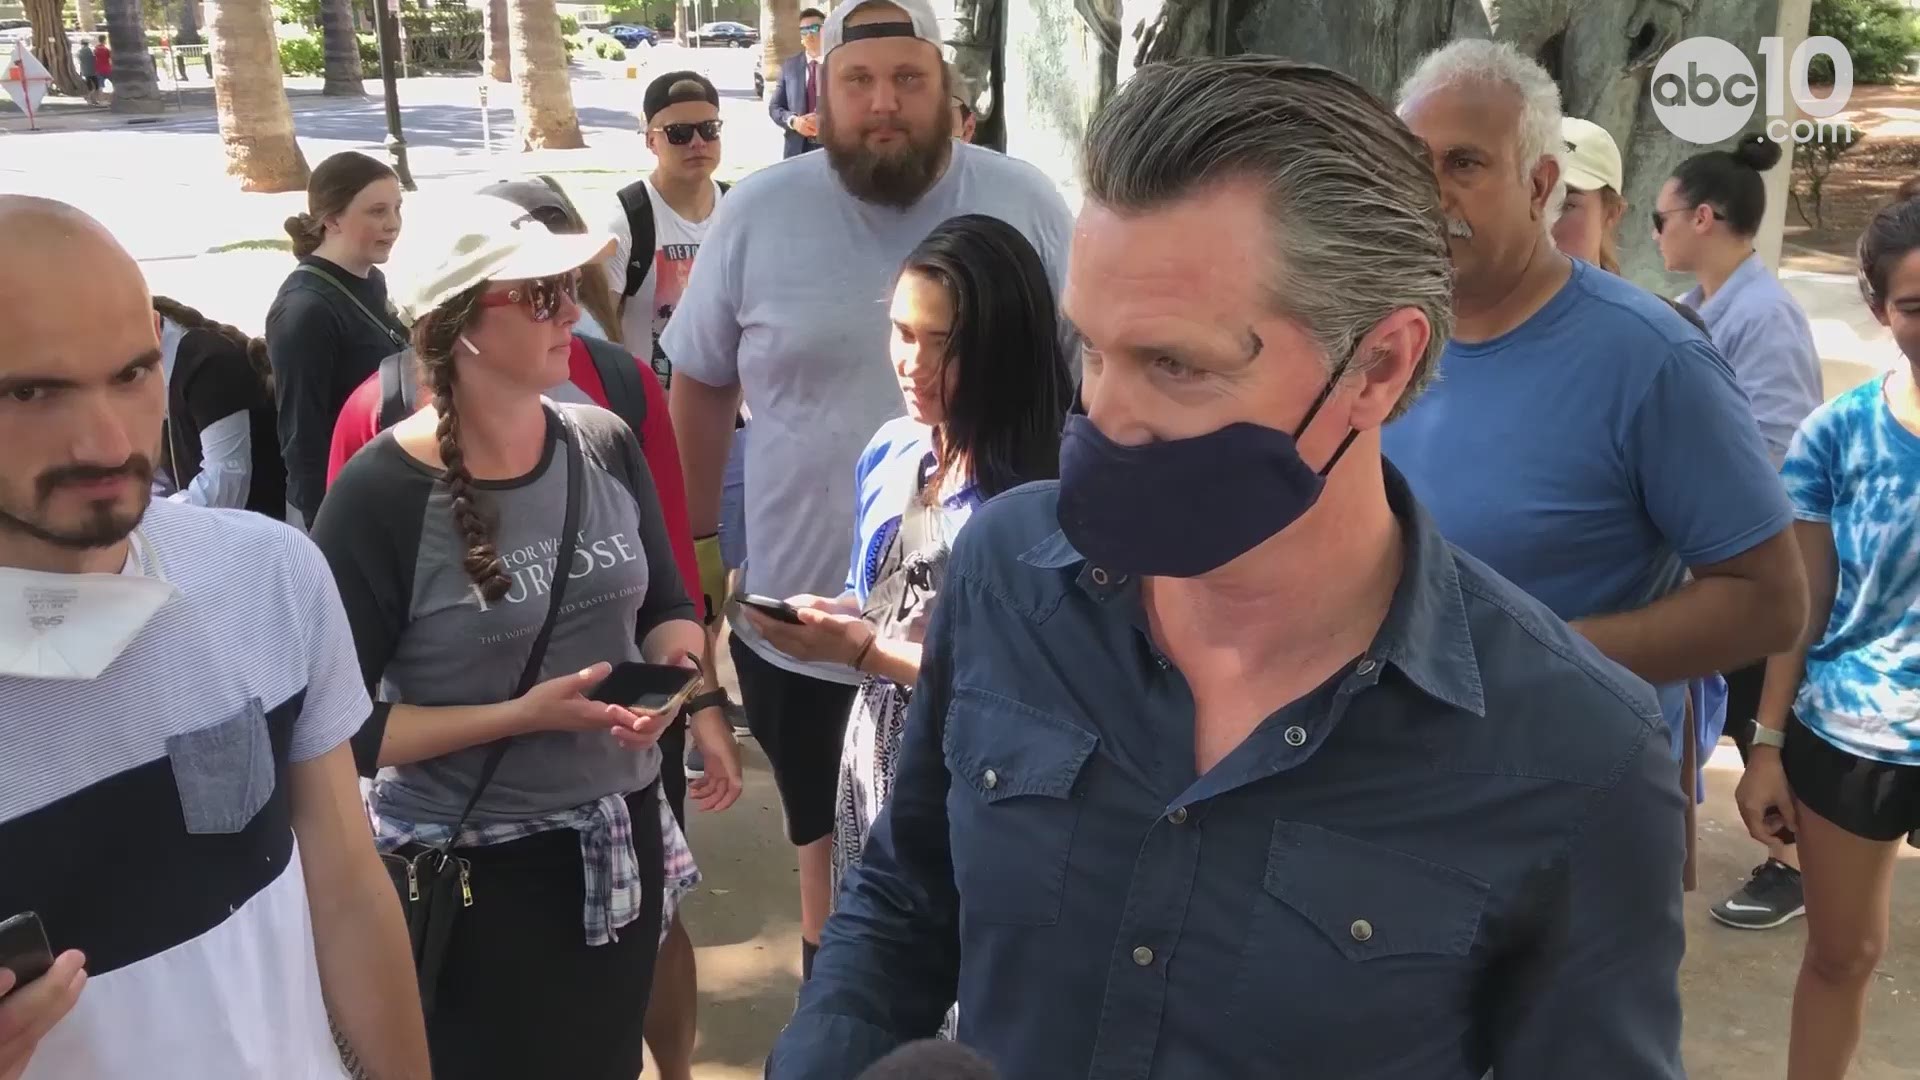 "You don't have to be something to do something," Governor Newsom said after helping to clean up Sacramento around the Capitol building.